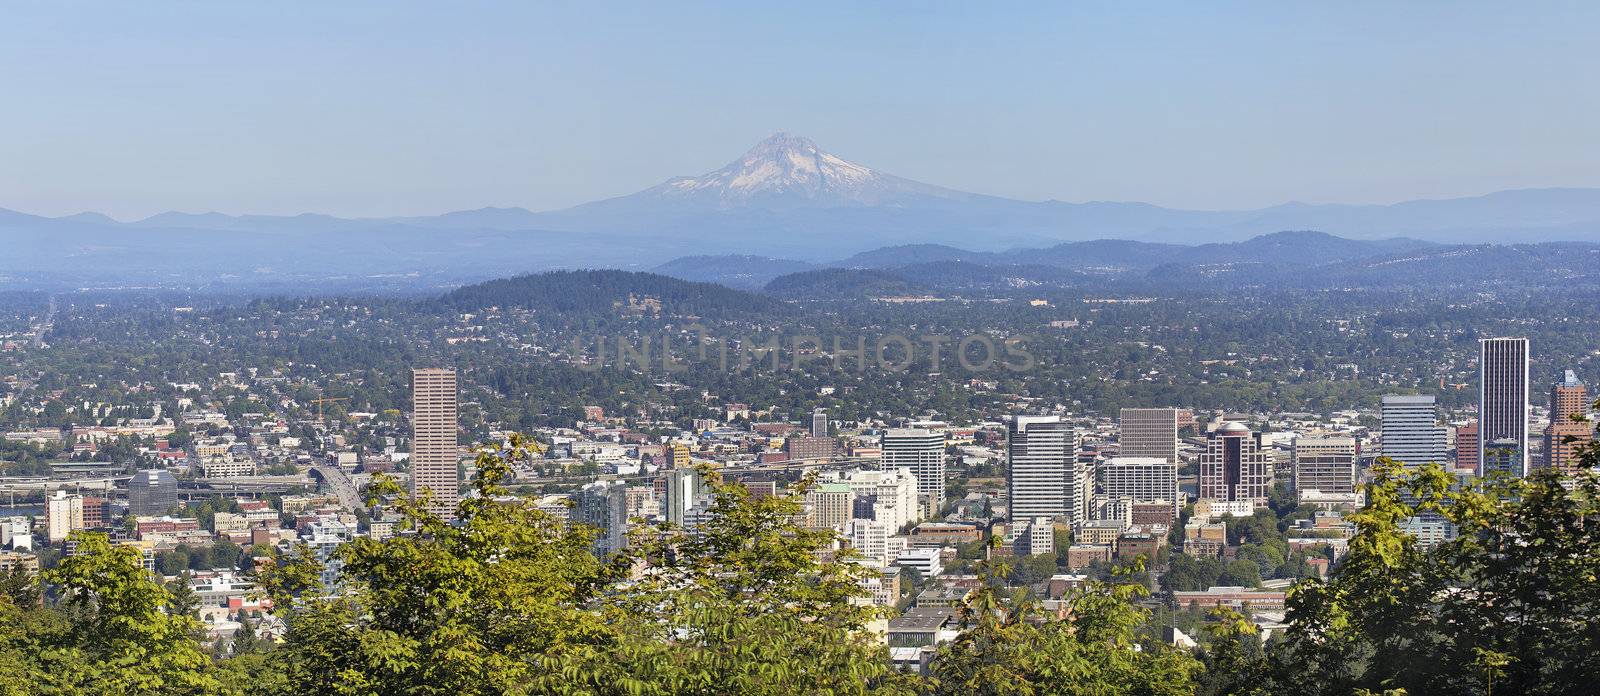 Portland Downtown Cityscape and Landscape with Mount Hood and Trees Panorama